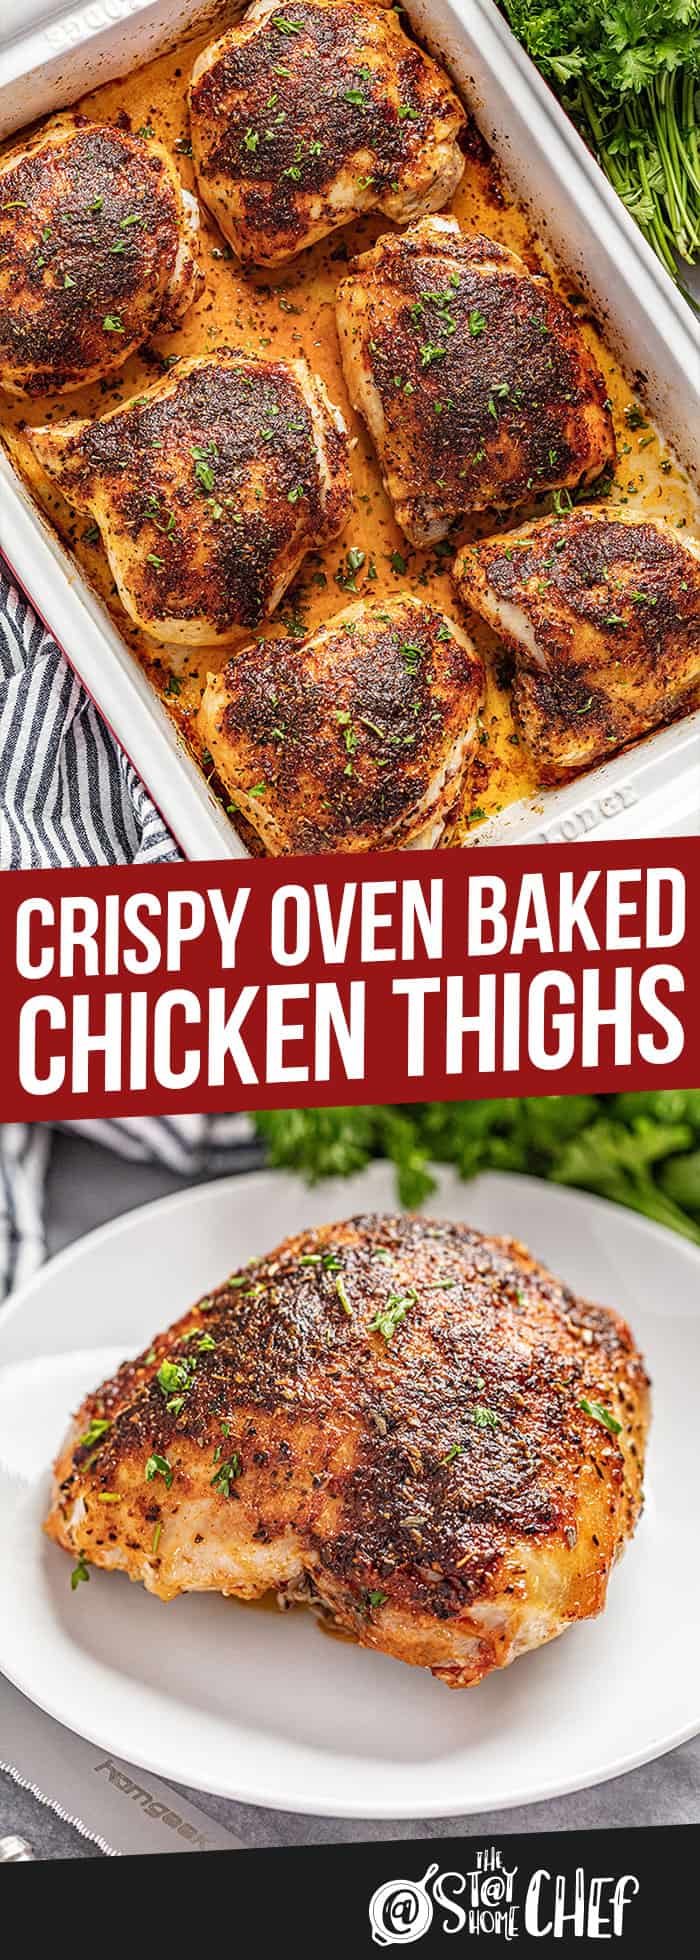 Crispy Oven Baked Chicken Thighs